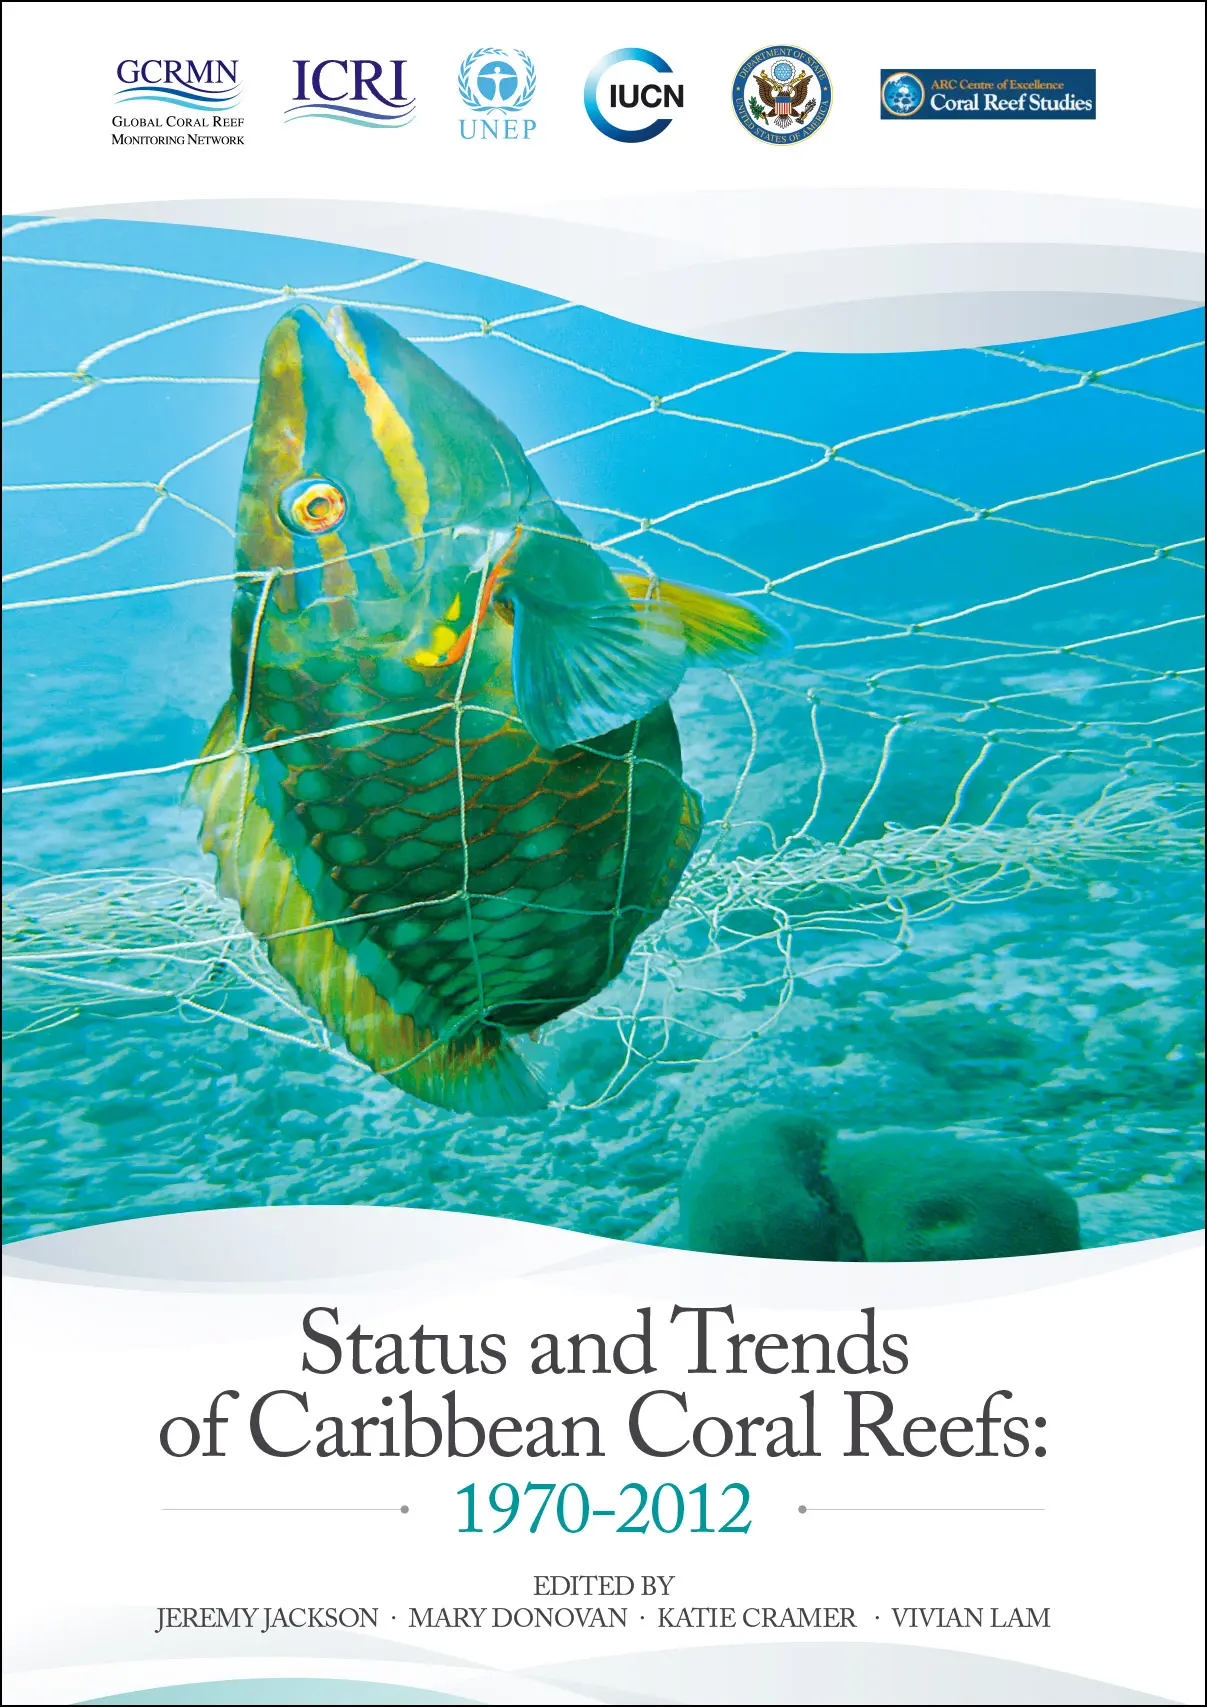 Status and Trends of Caribbean Coral Reefs: 1970-2012